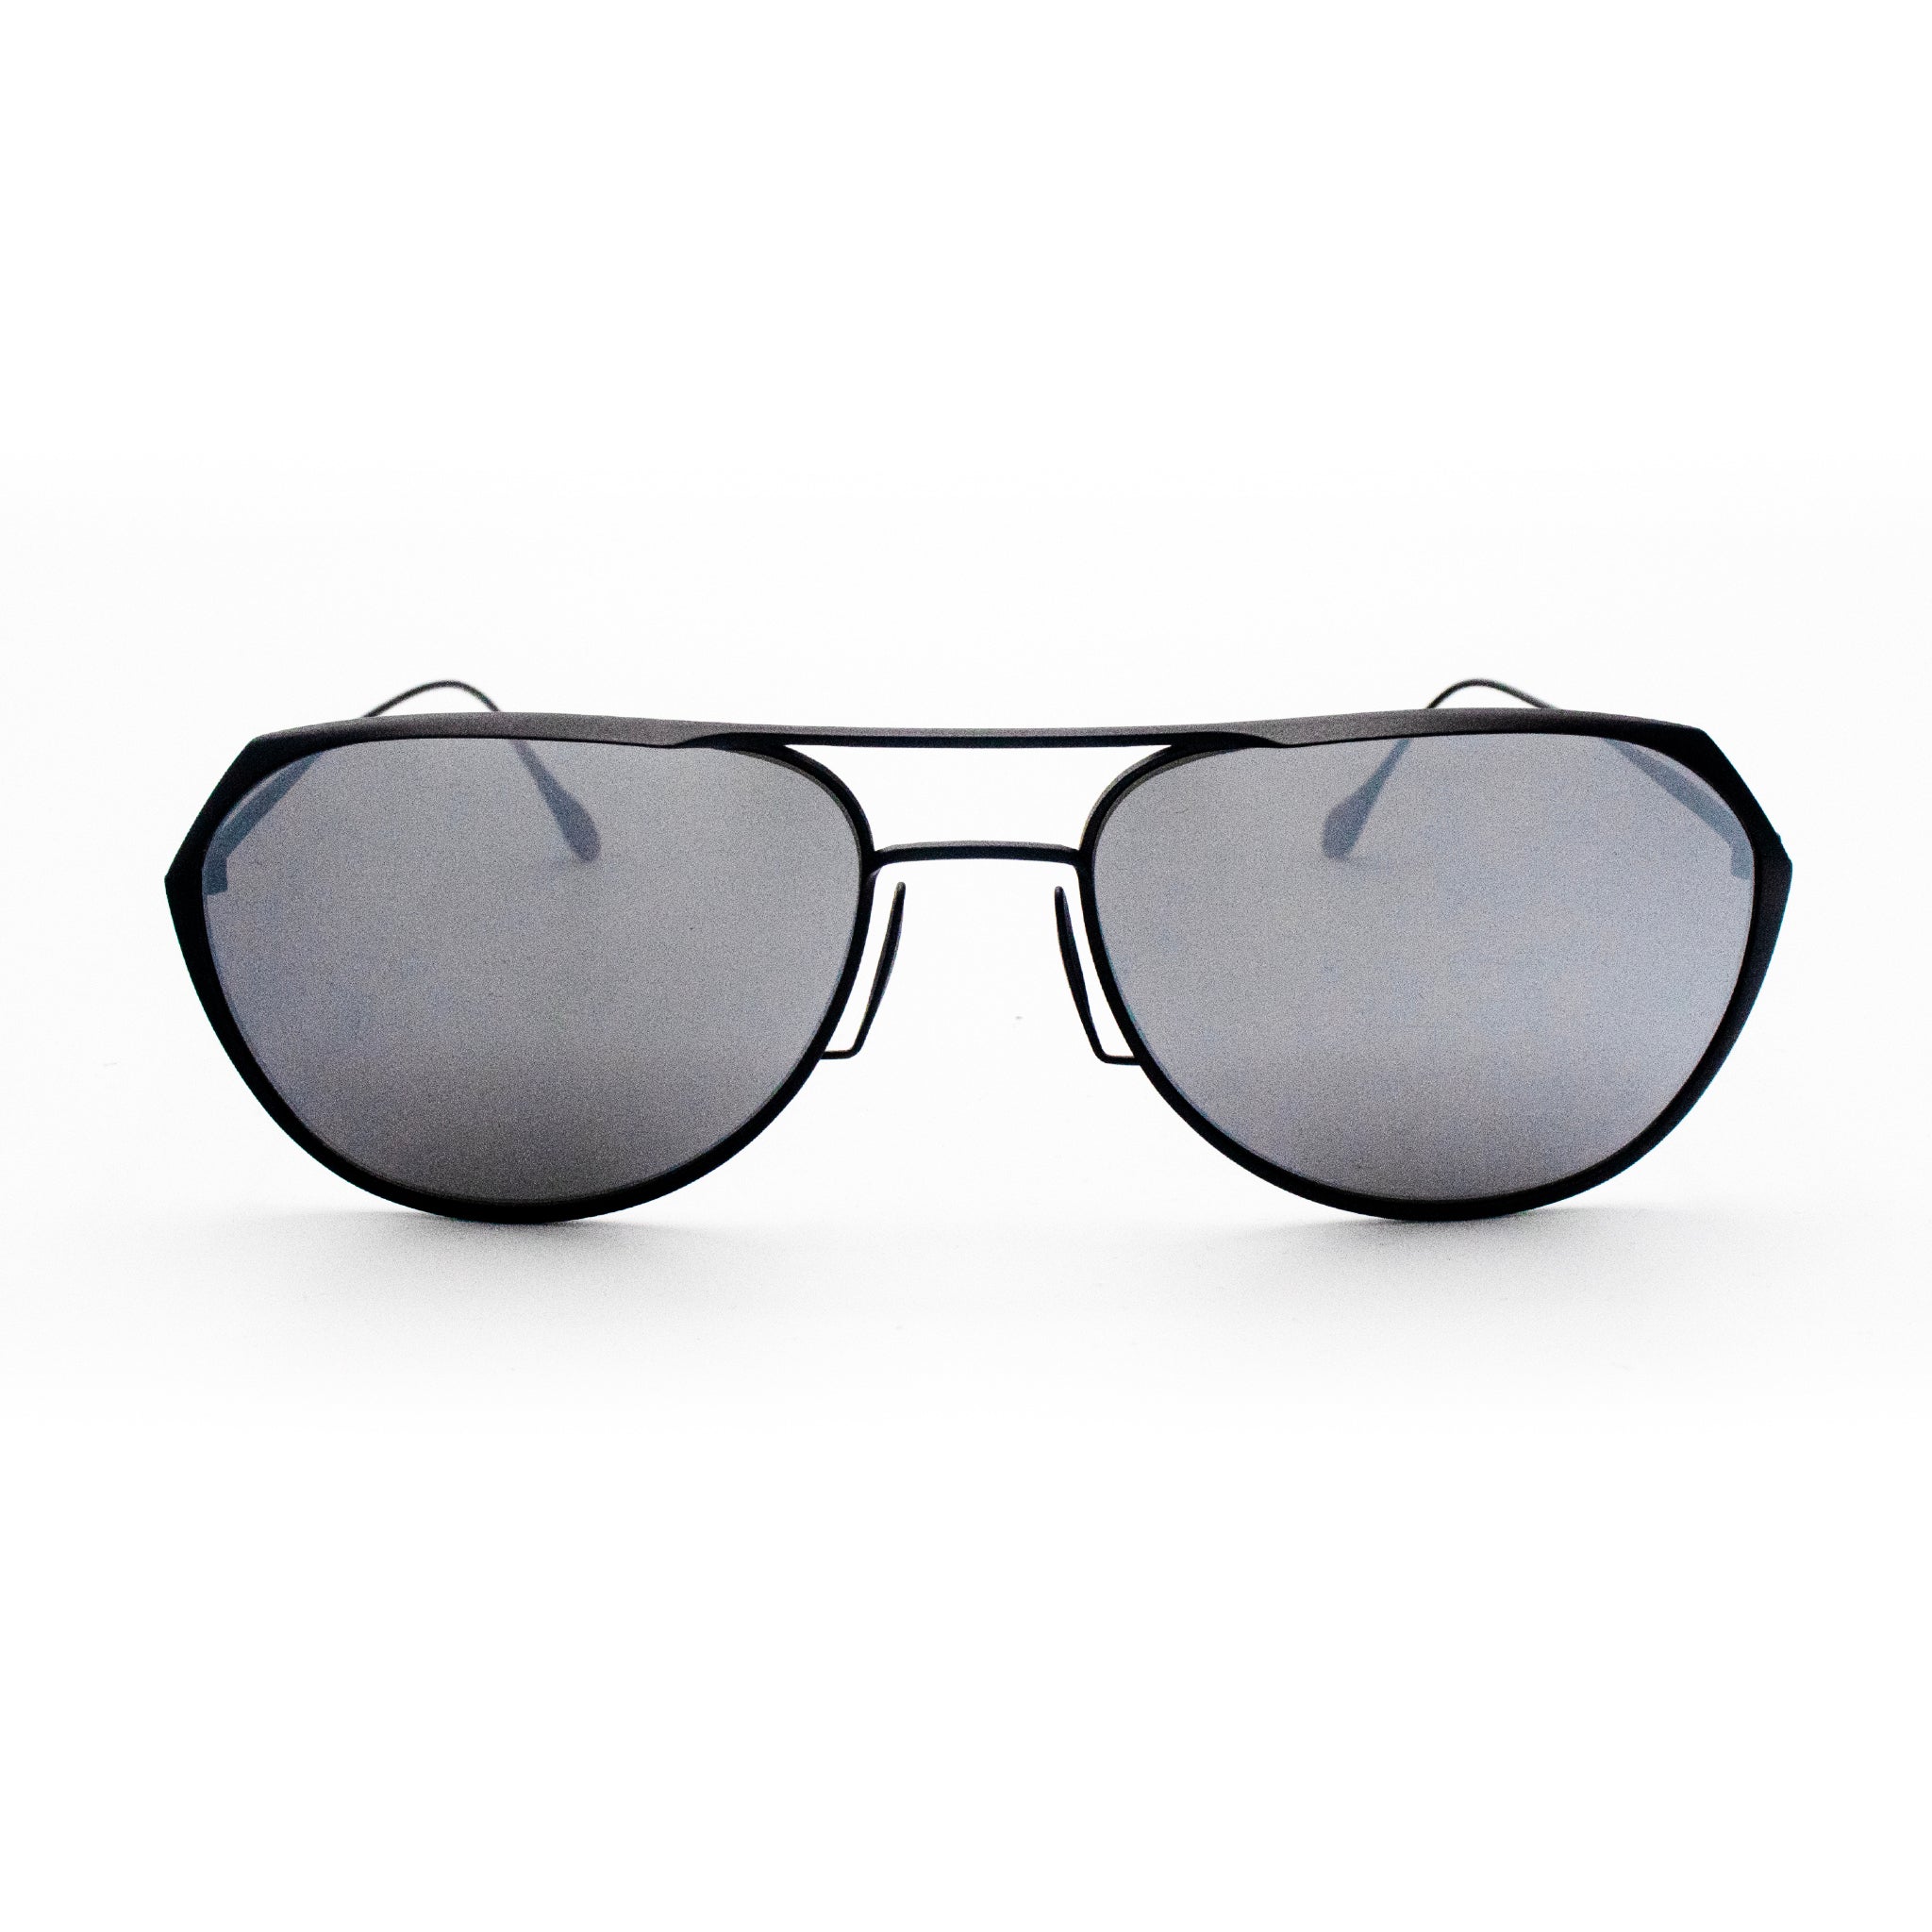 Rigards x Geoffrey B. Small Shades in Black – SECTS SHOP